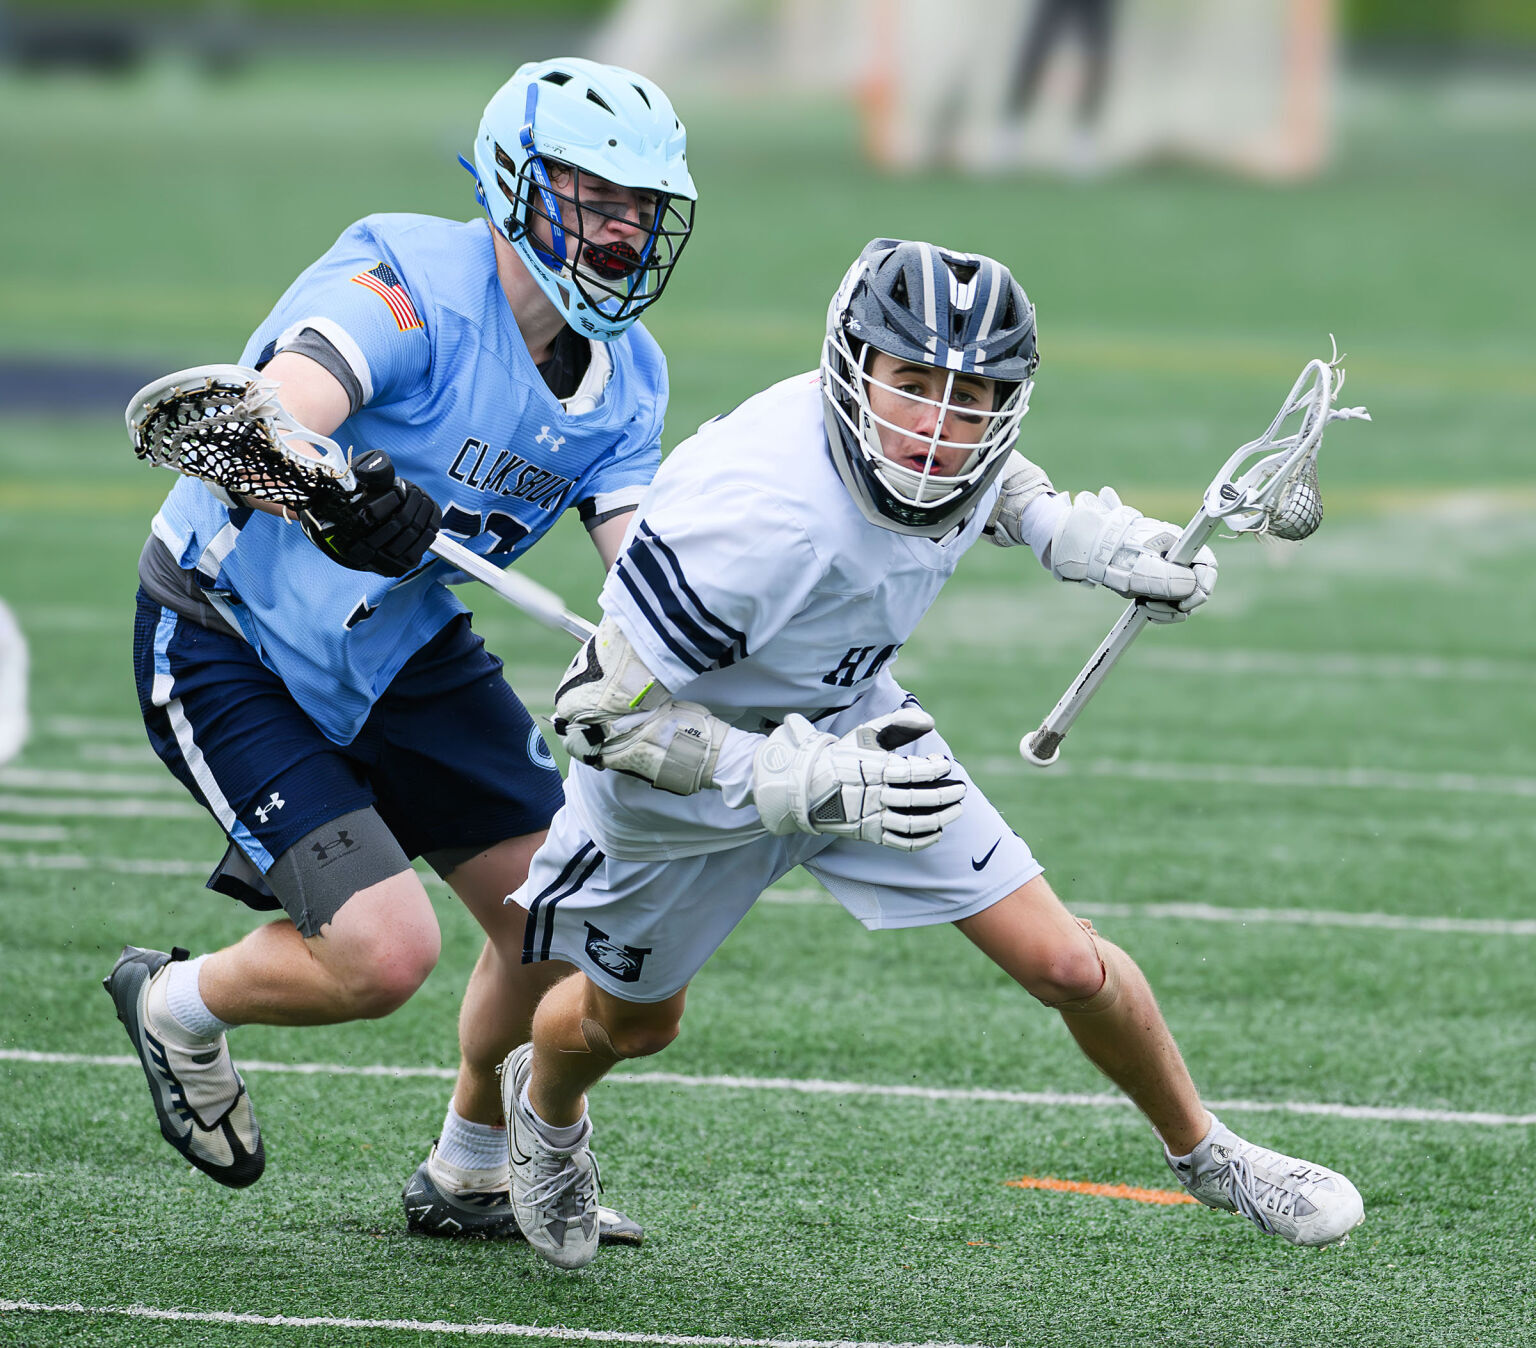 Prompt victors: Date with formal dance encourages Urbana boys lax to make quick work of Clarksburg